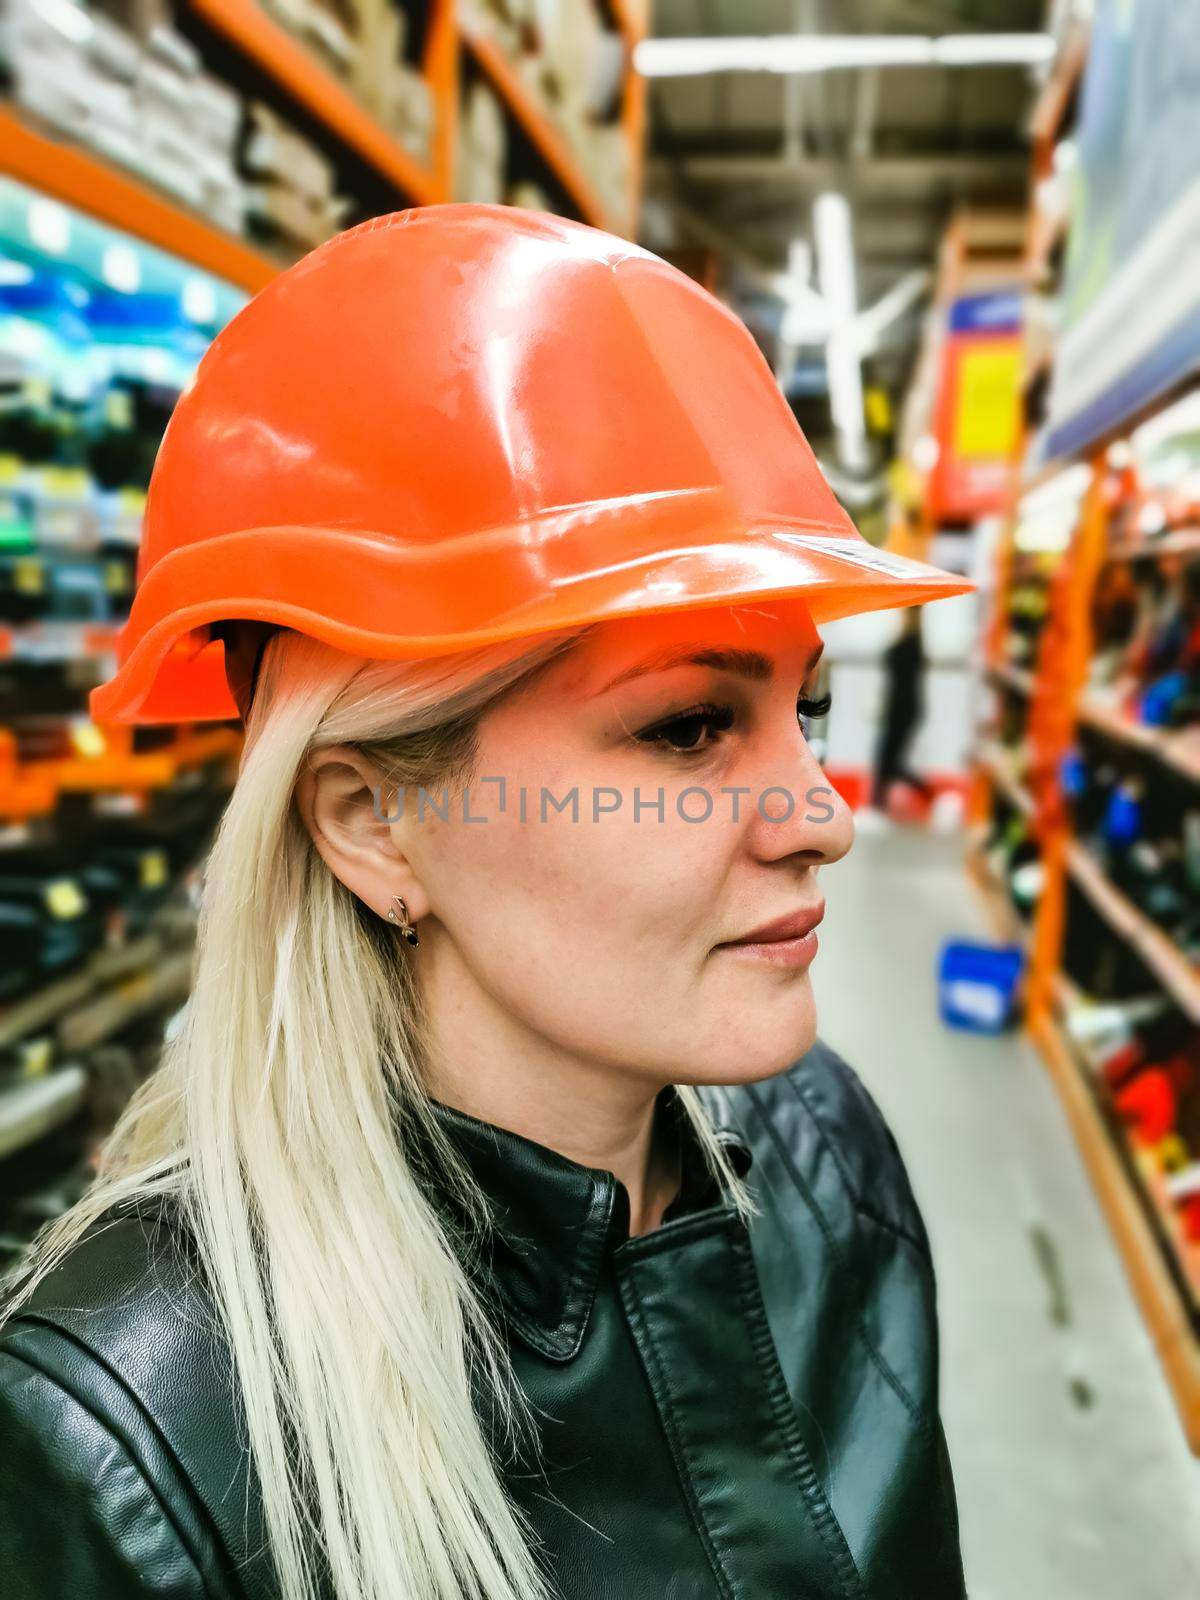 a woman measures a helmet in a store.